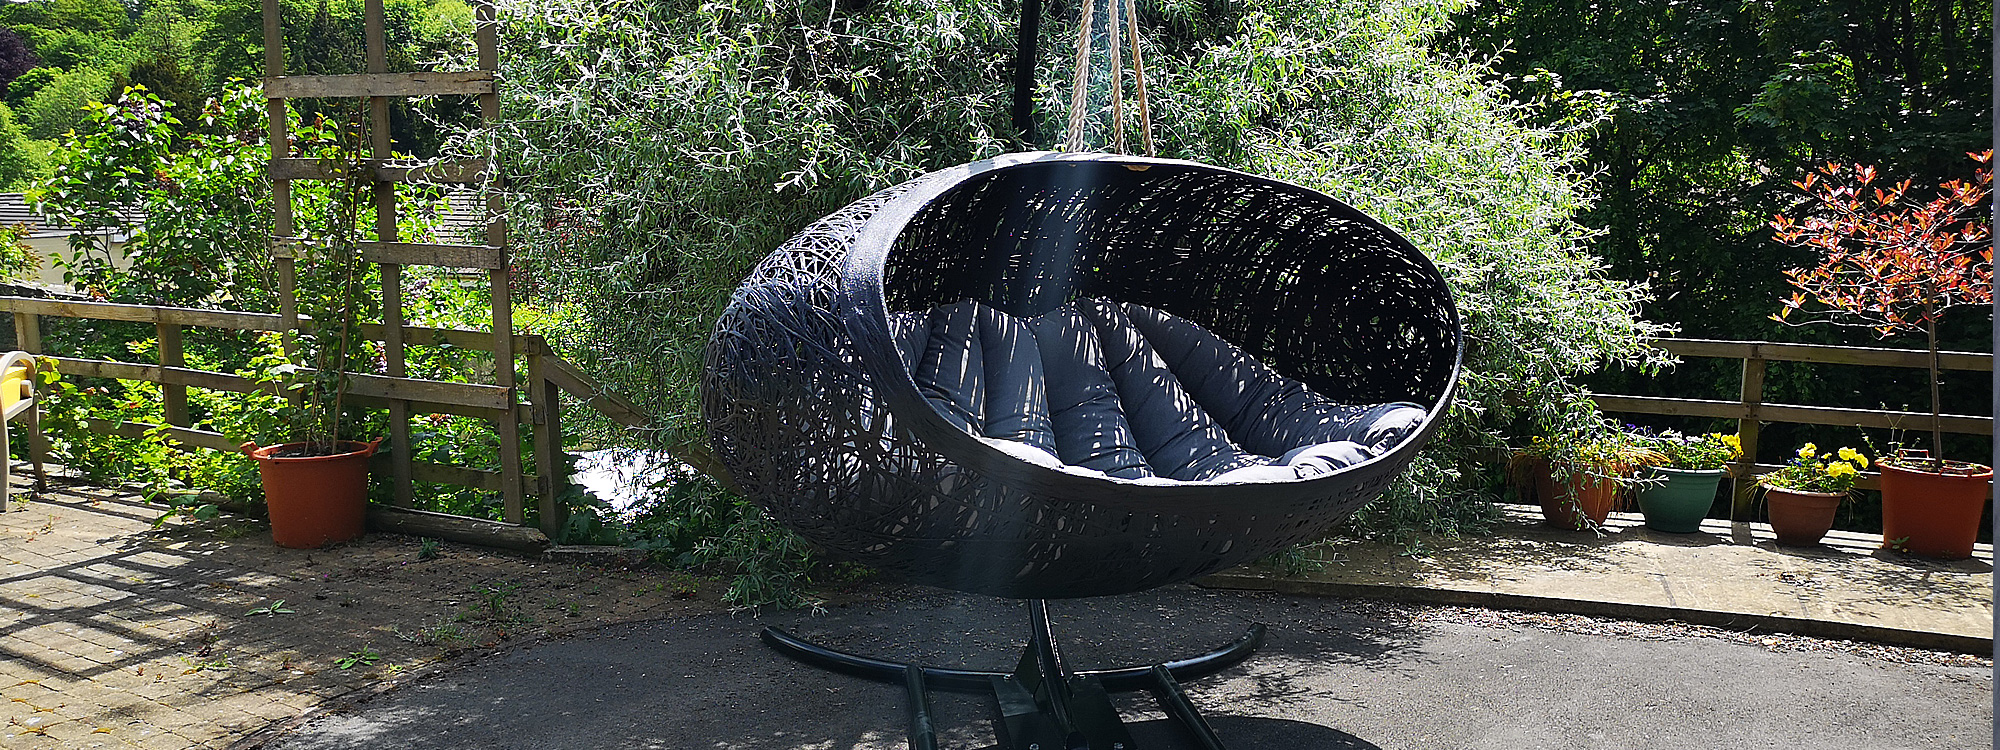 View Installation Of Alpha Modern Garden Swing Seat - Hanging Garden Pod In High Quality Swing Sofa Materials By Unknown Swing Chair Company.